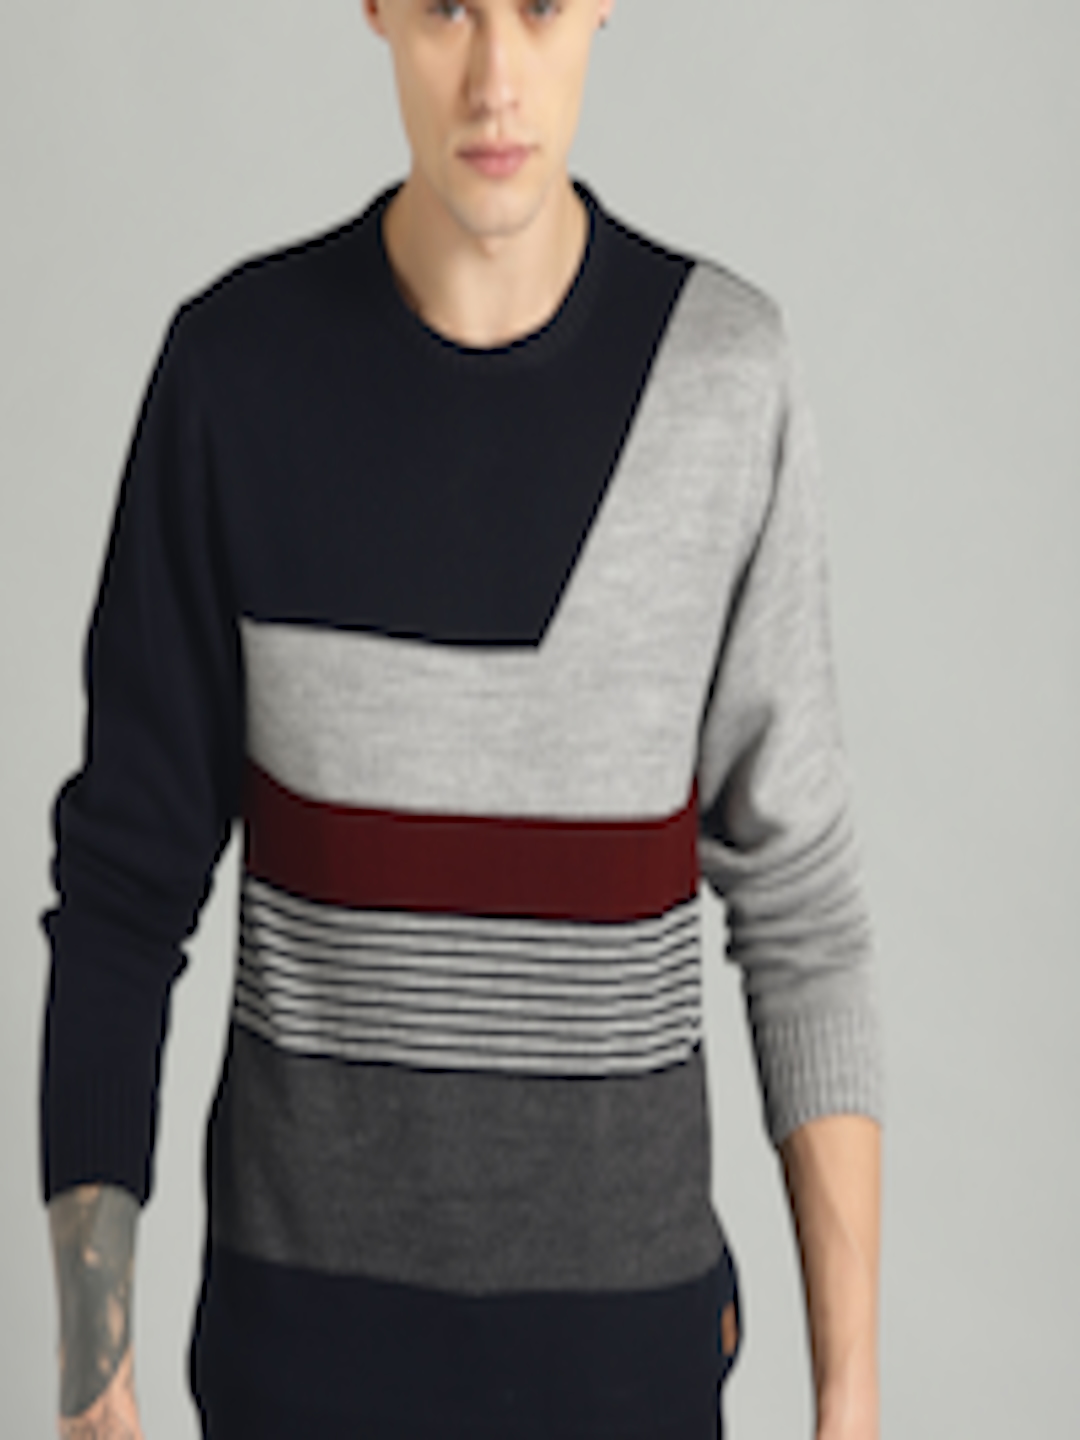 Buy The Roadster Lifestyle Co Men Navy Blue & Grey Striped Sweater - Sweaters for Men 9564909 